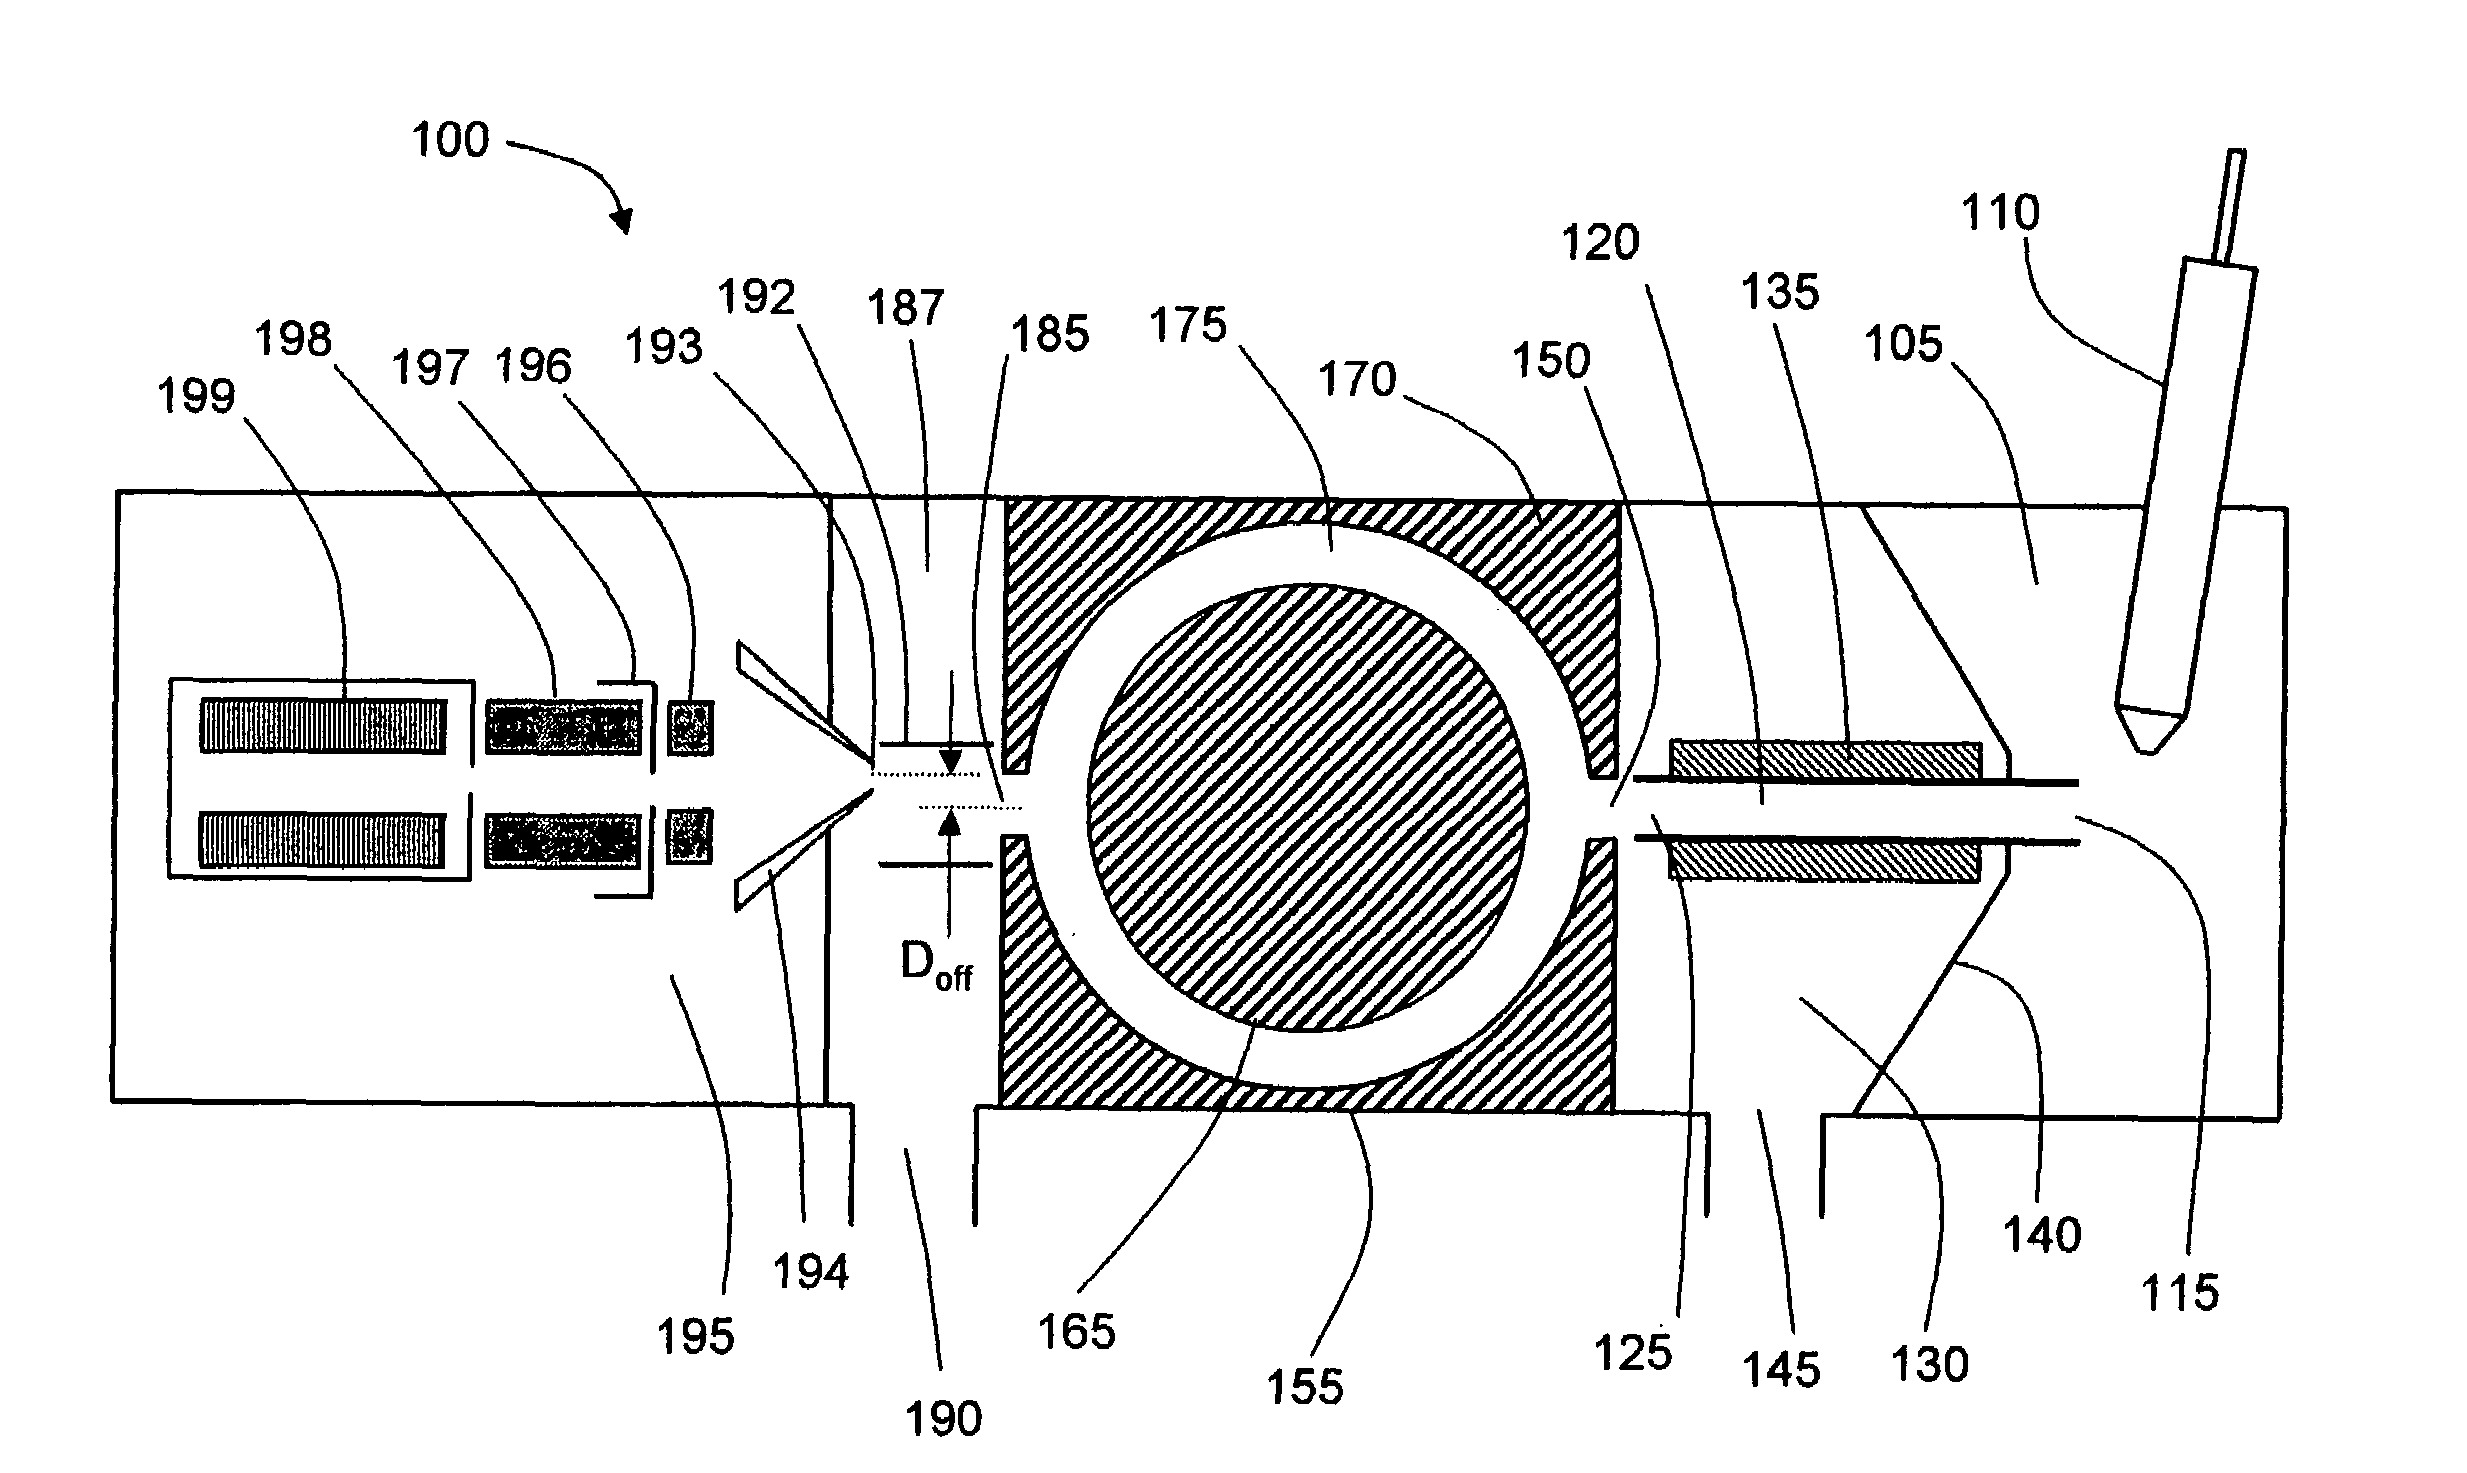 Enhanced ion desolvation for an ion mobility spectrometry device